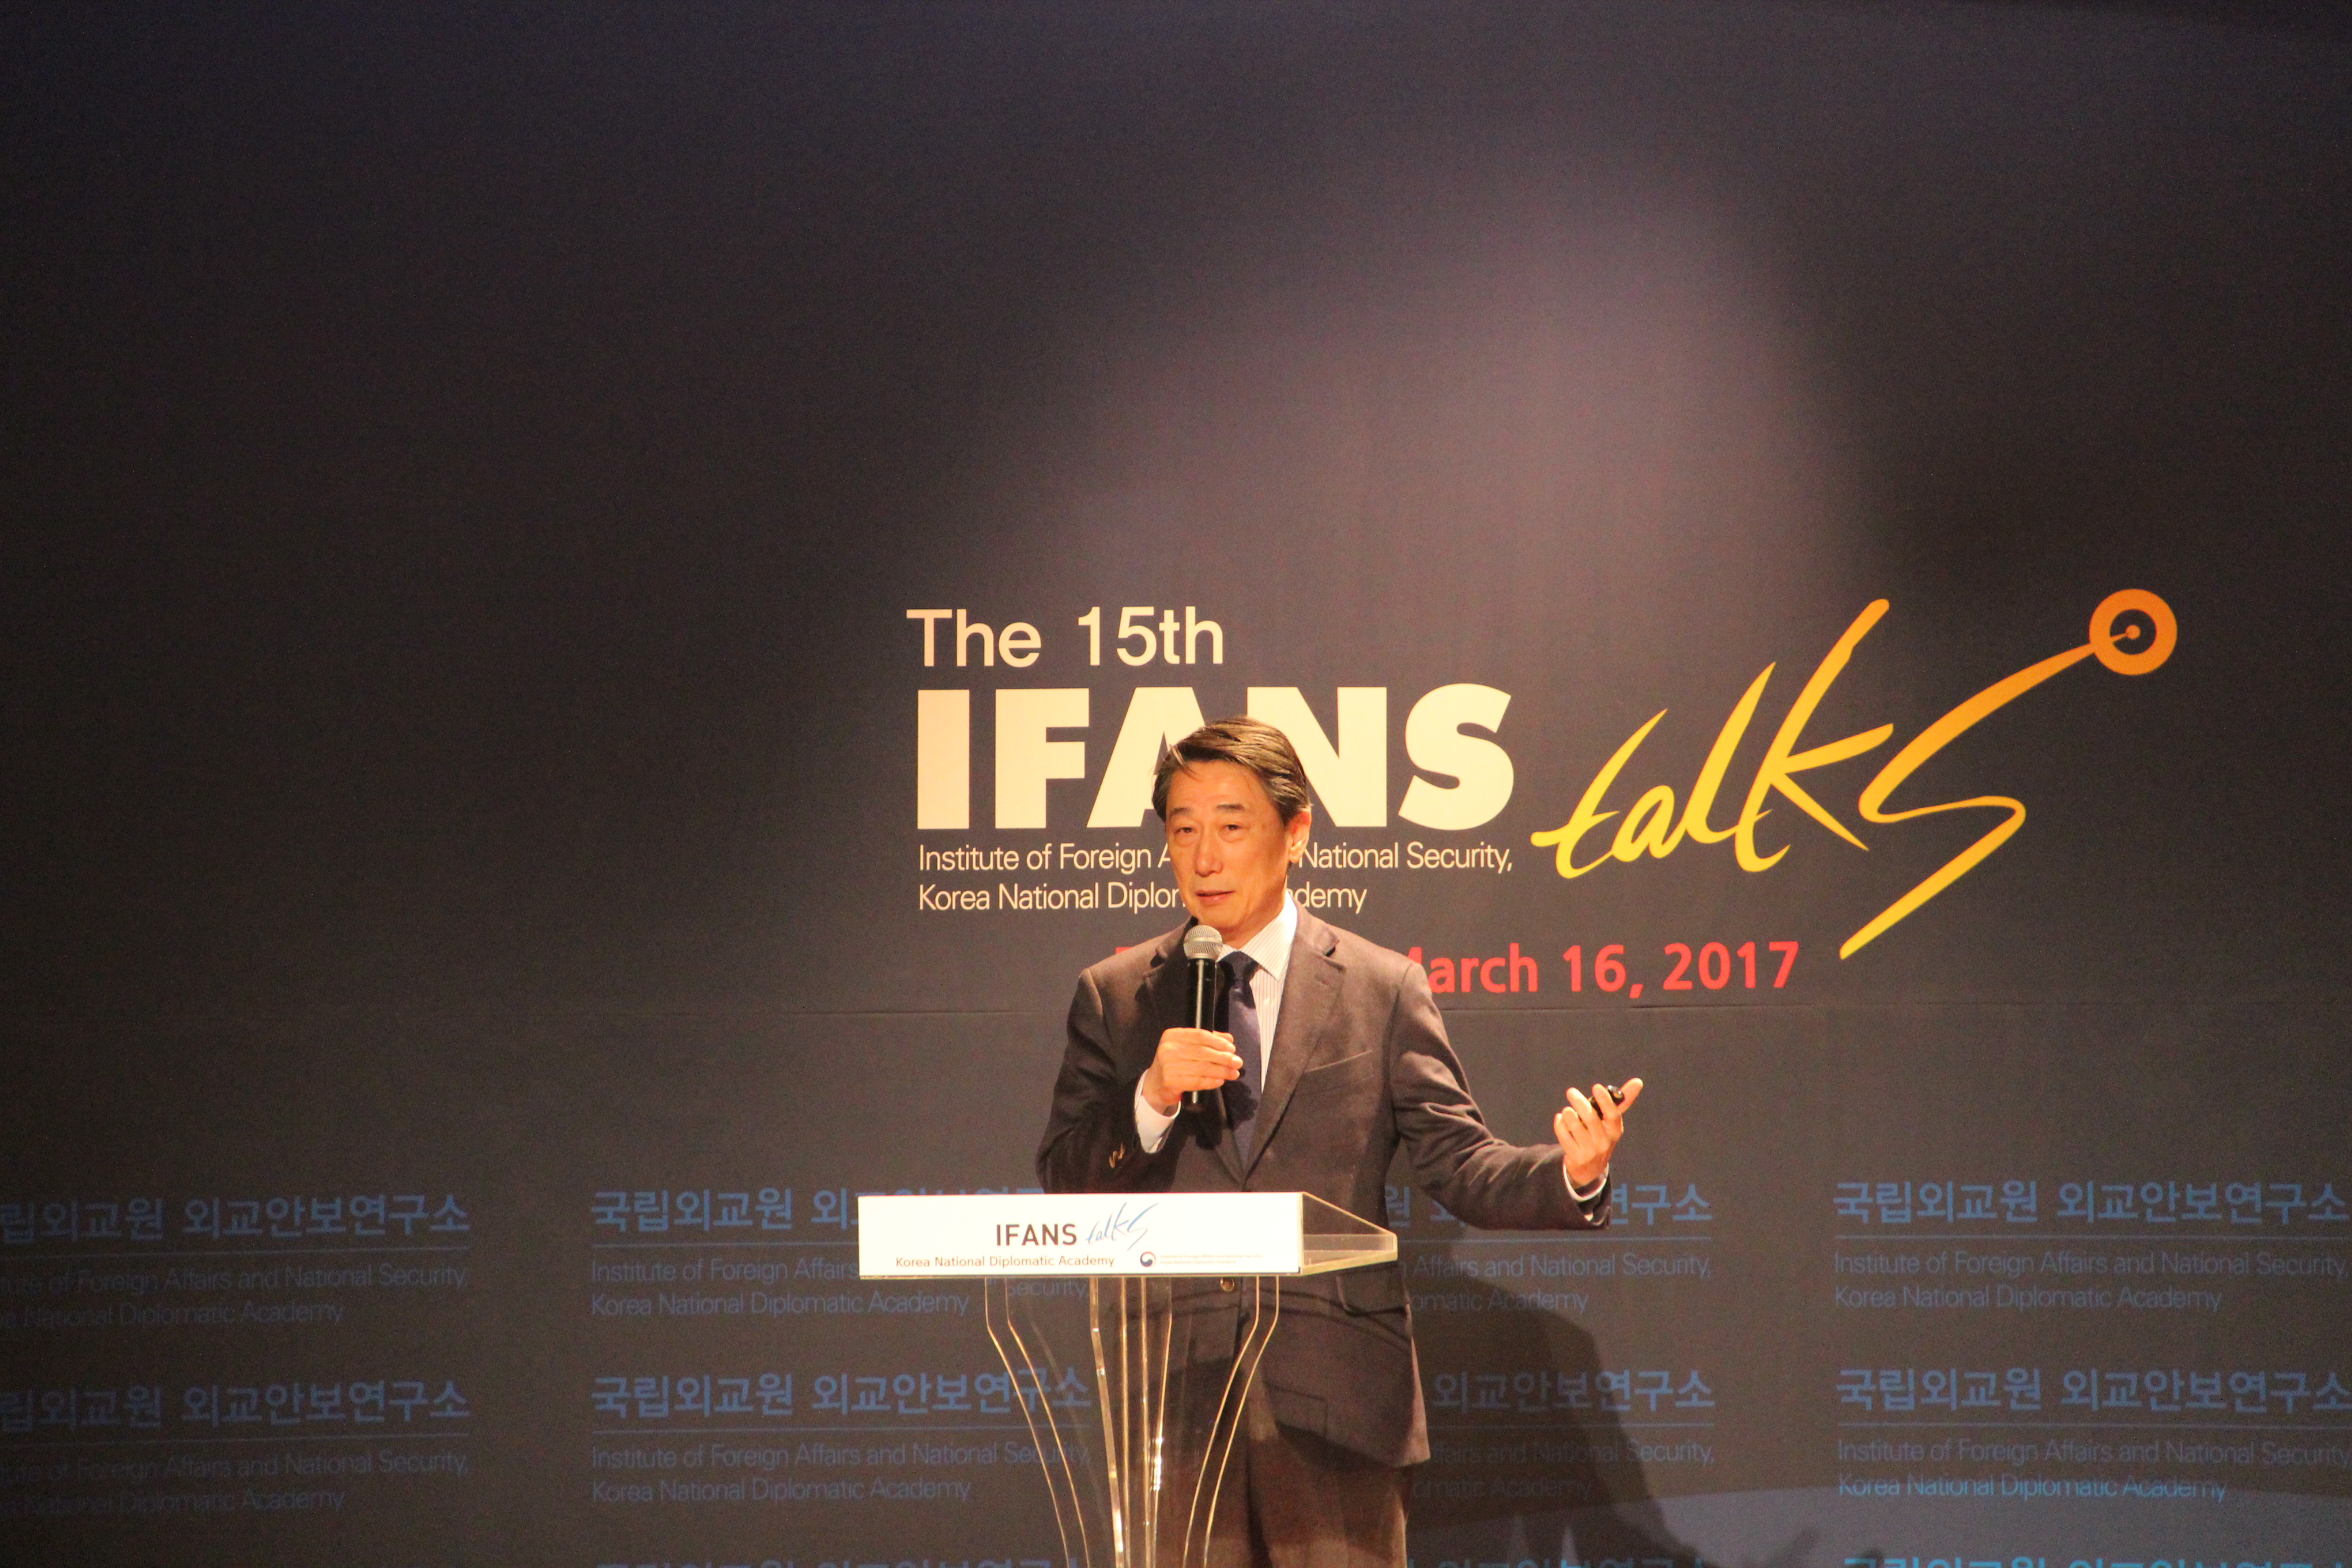 The 15th IFANS TALKS